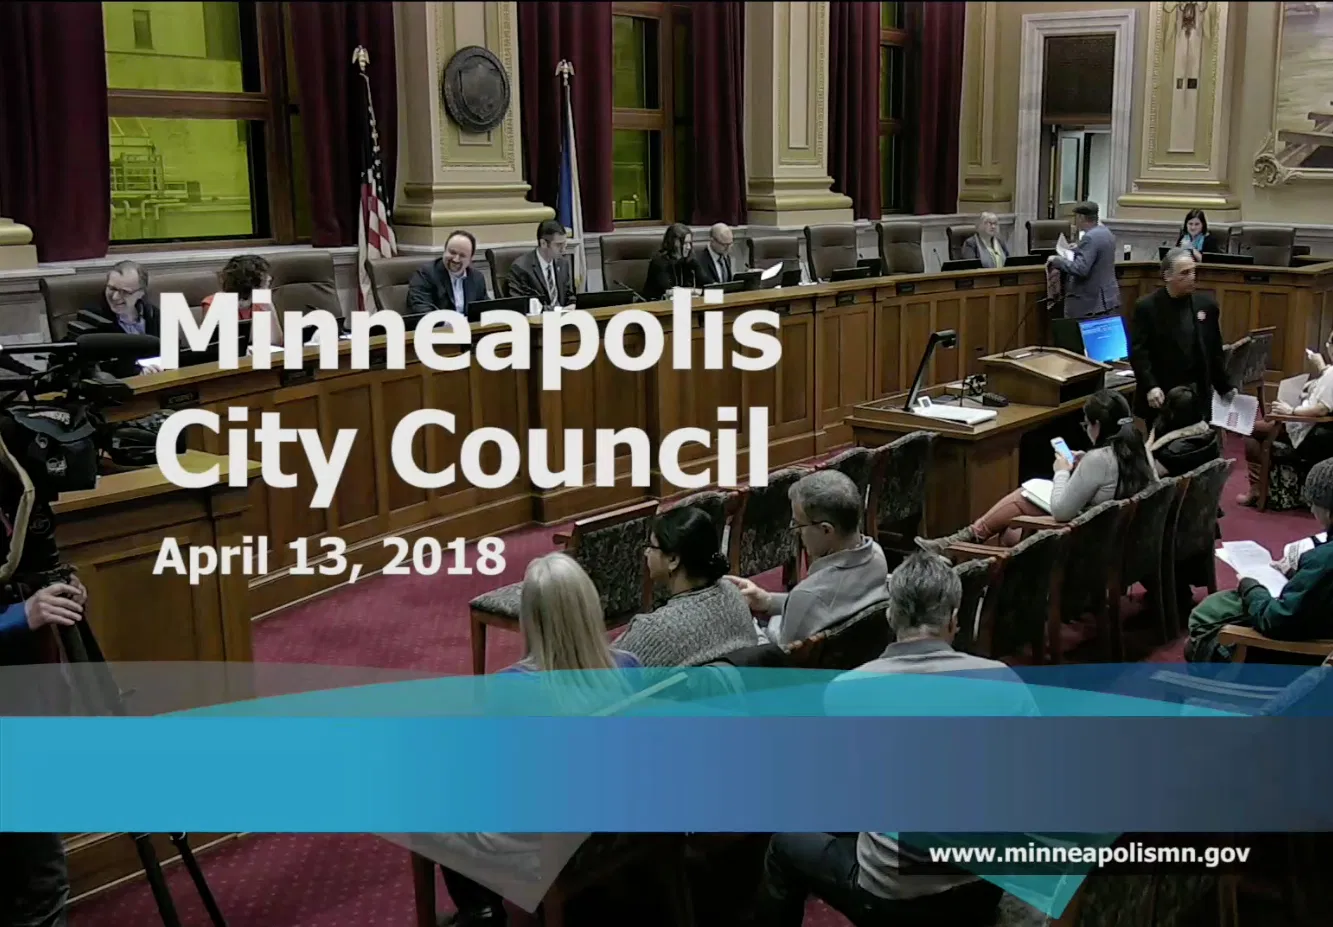 Minneapolis City Council Approves “The Falls” Redevelopment Plan for the Upper Lock